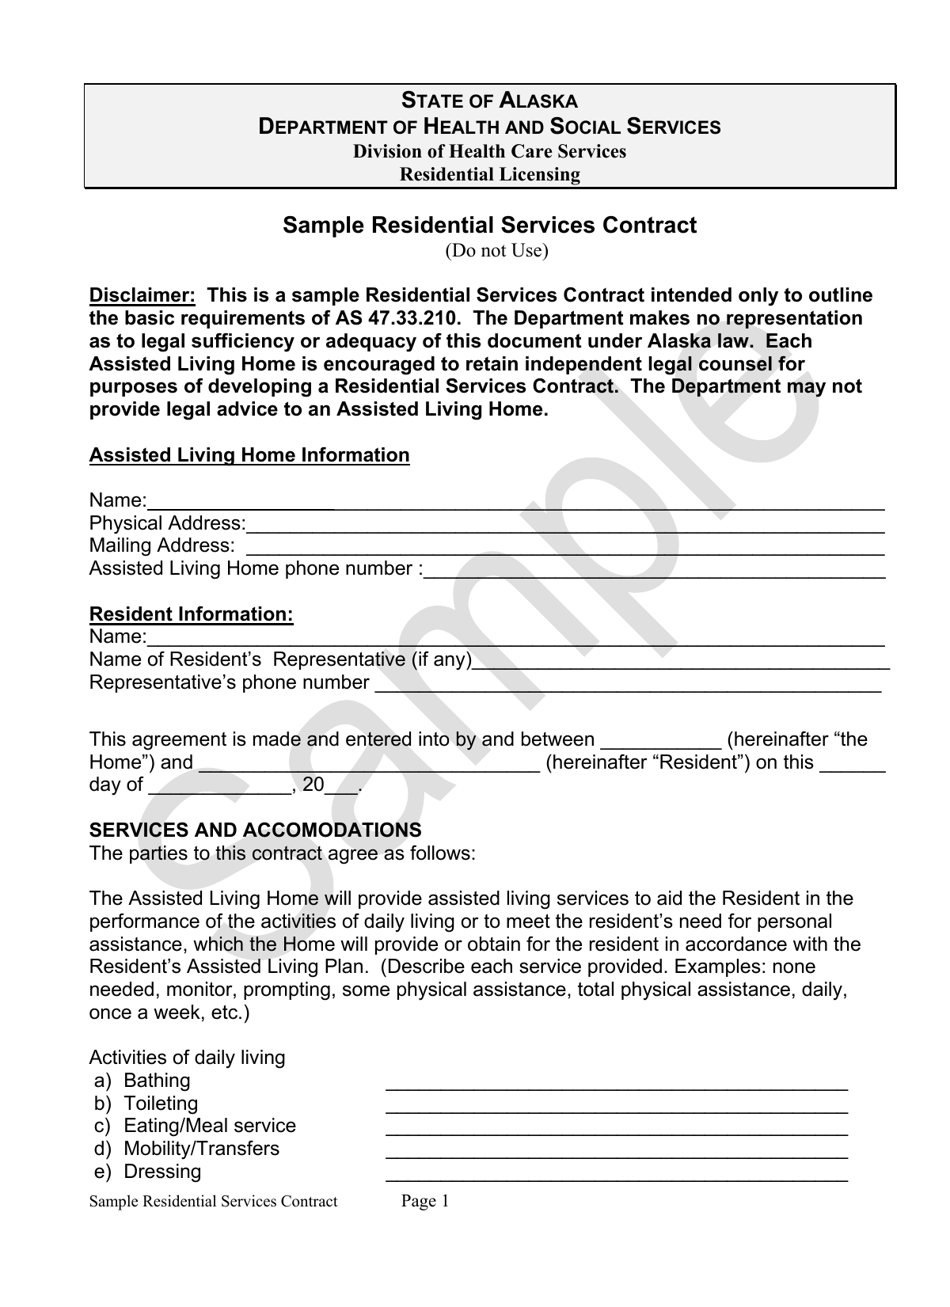 Sample Residential Services Contract - Alaska, Page 1